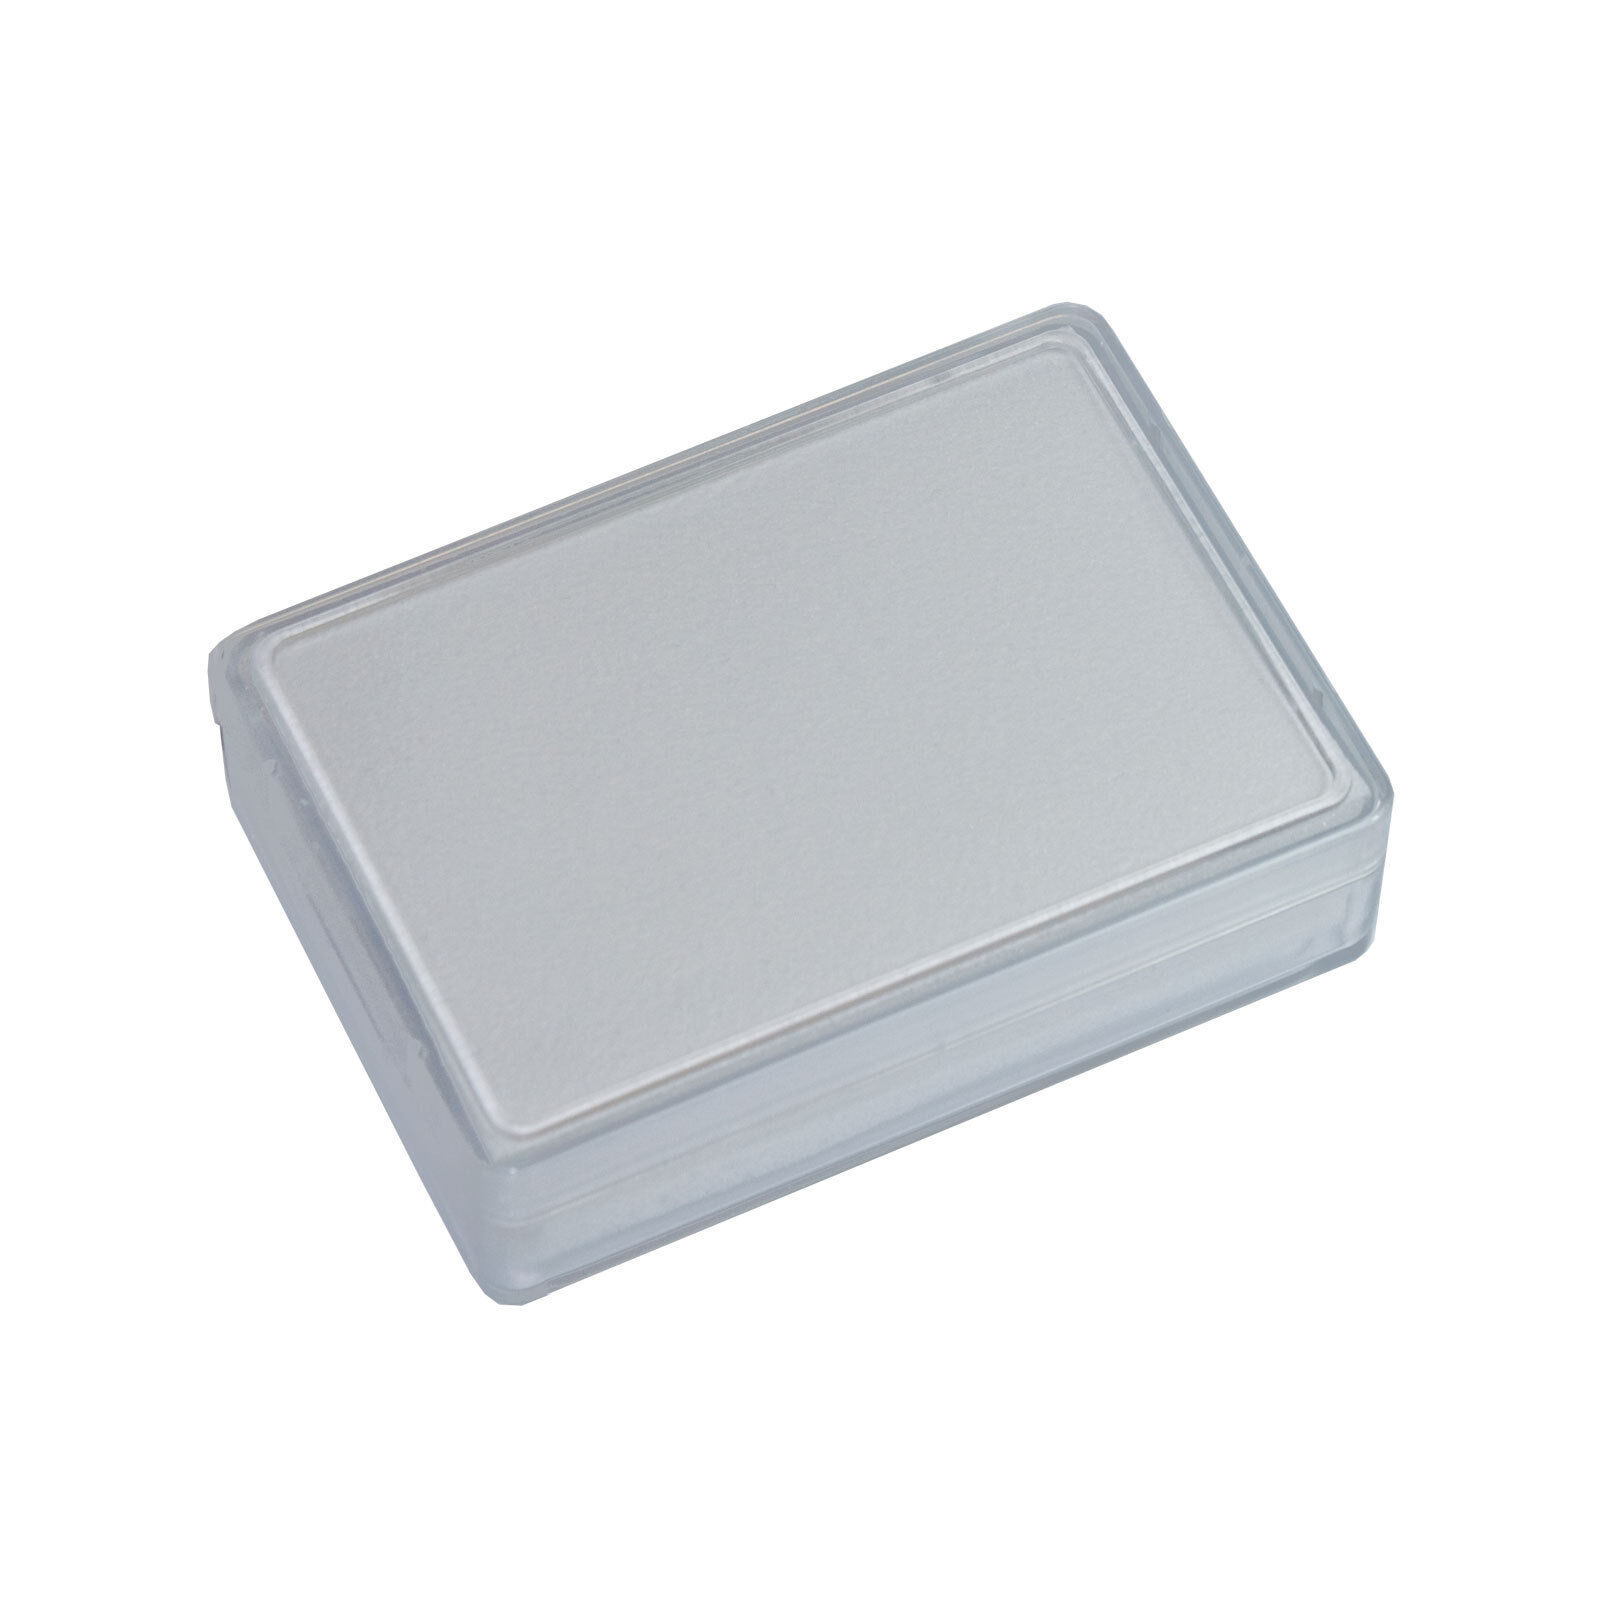 20 pcs clear boxes 38 x 58 x 17 mm with foam material - white